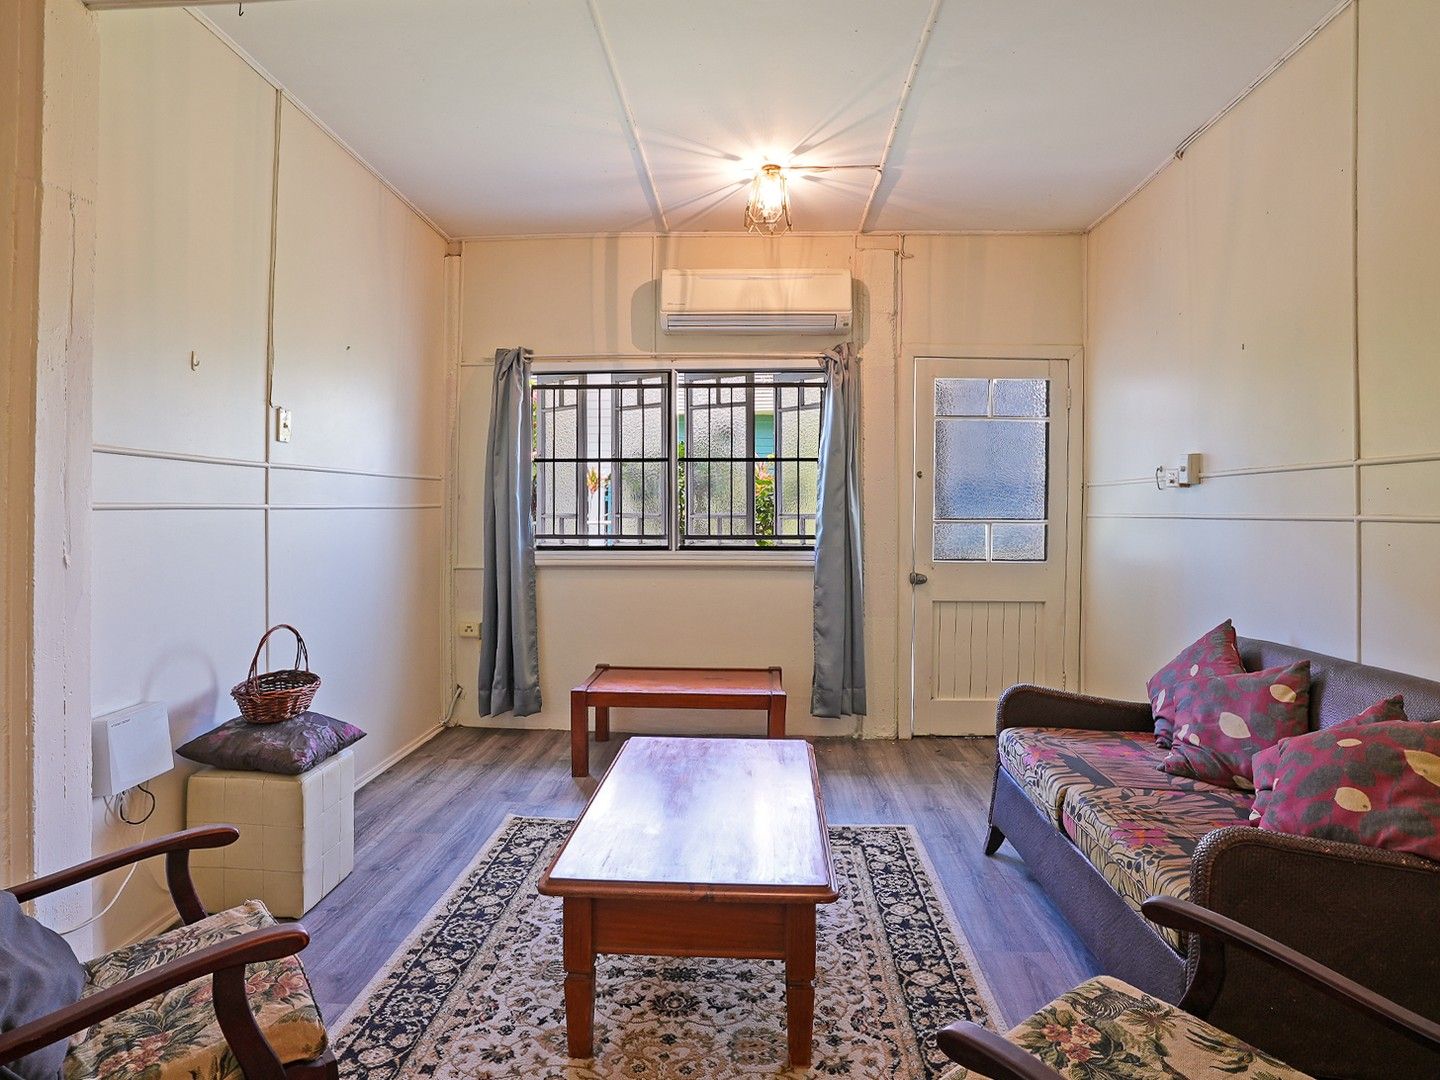 2 bedrooms Apartment / Unit / Flat in 2/81 Eyre Street NORTH WARD QLD, 4810